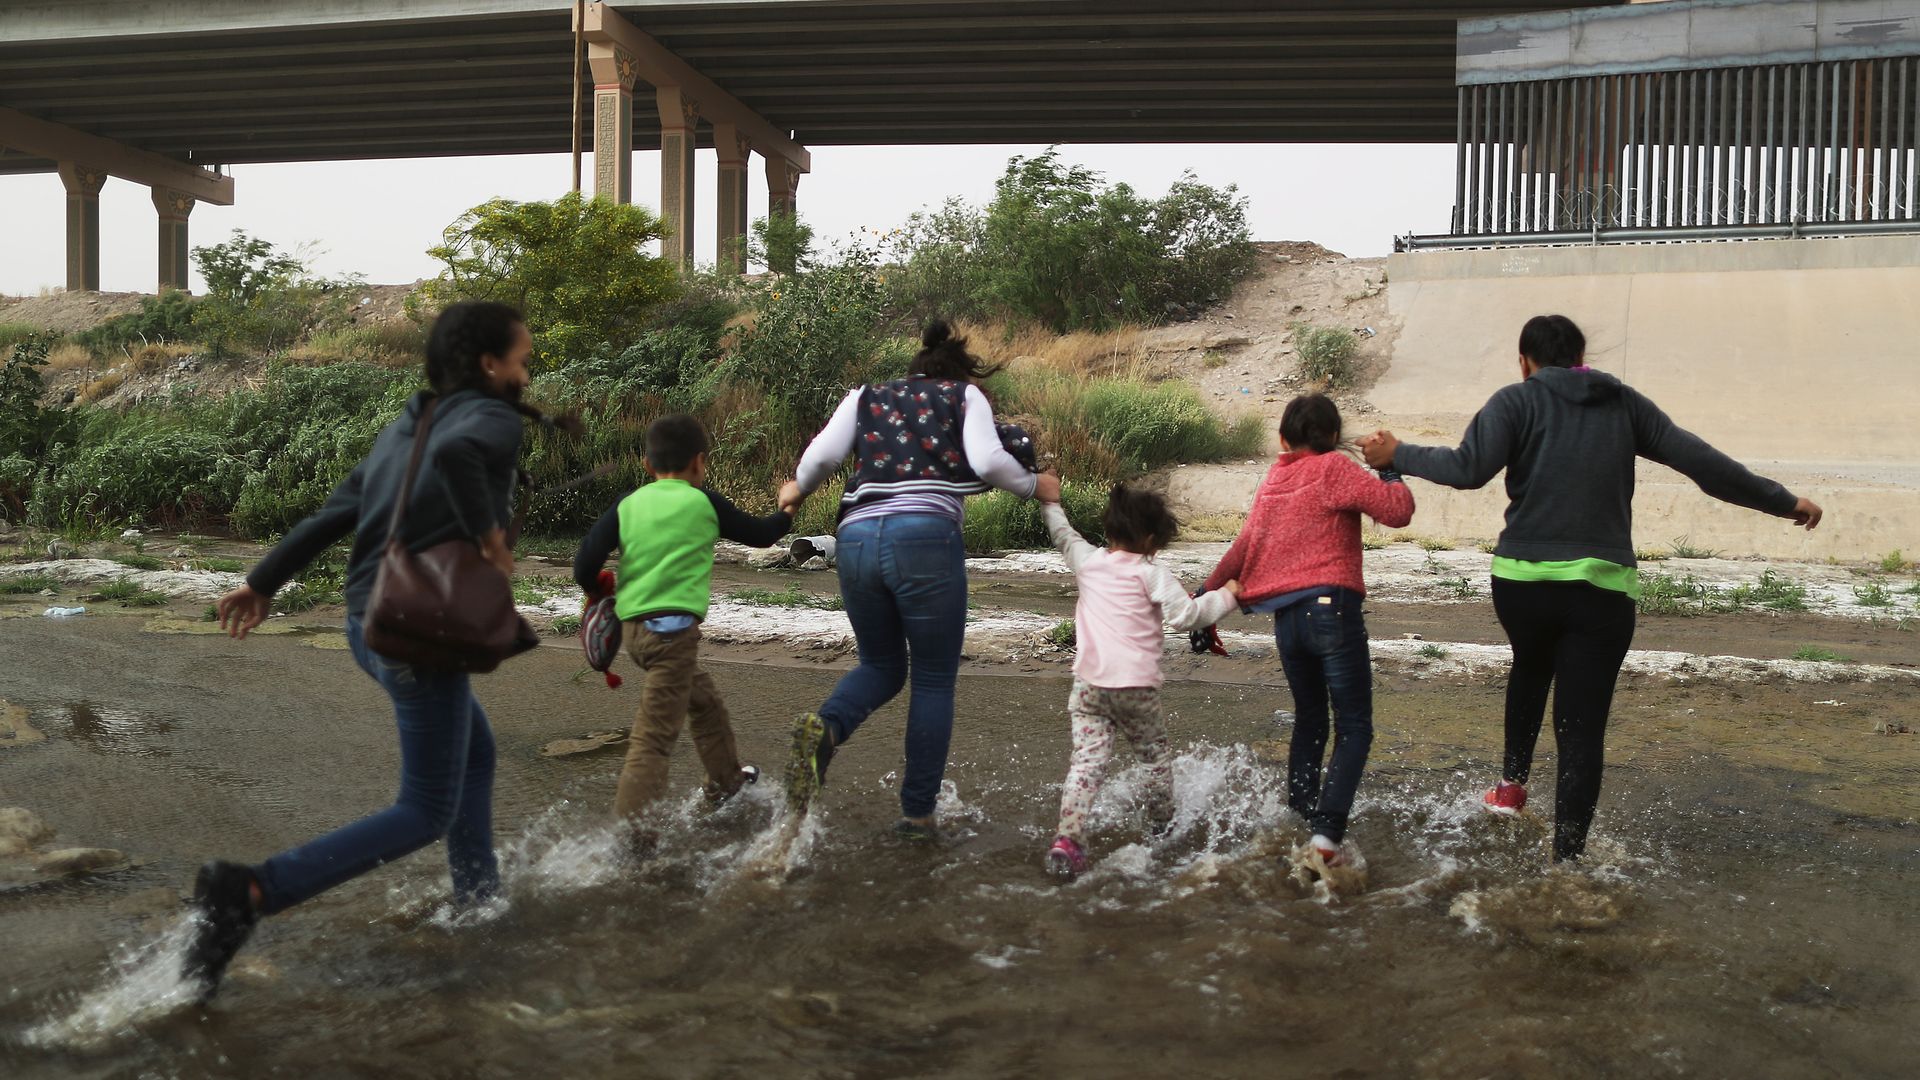 A group of 5 migrant women and young girls run through a puddle toward the U.S. border. 